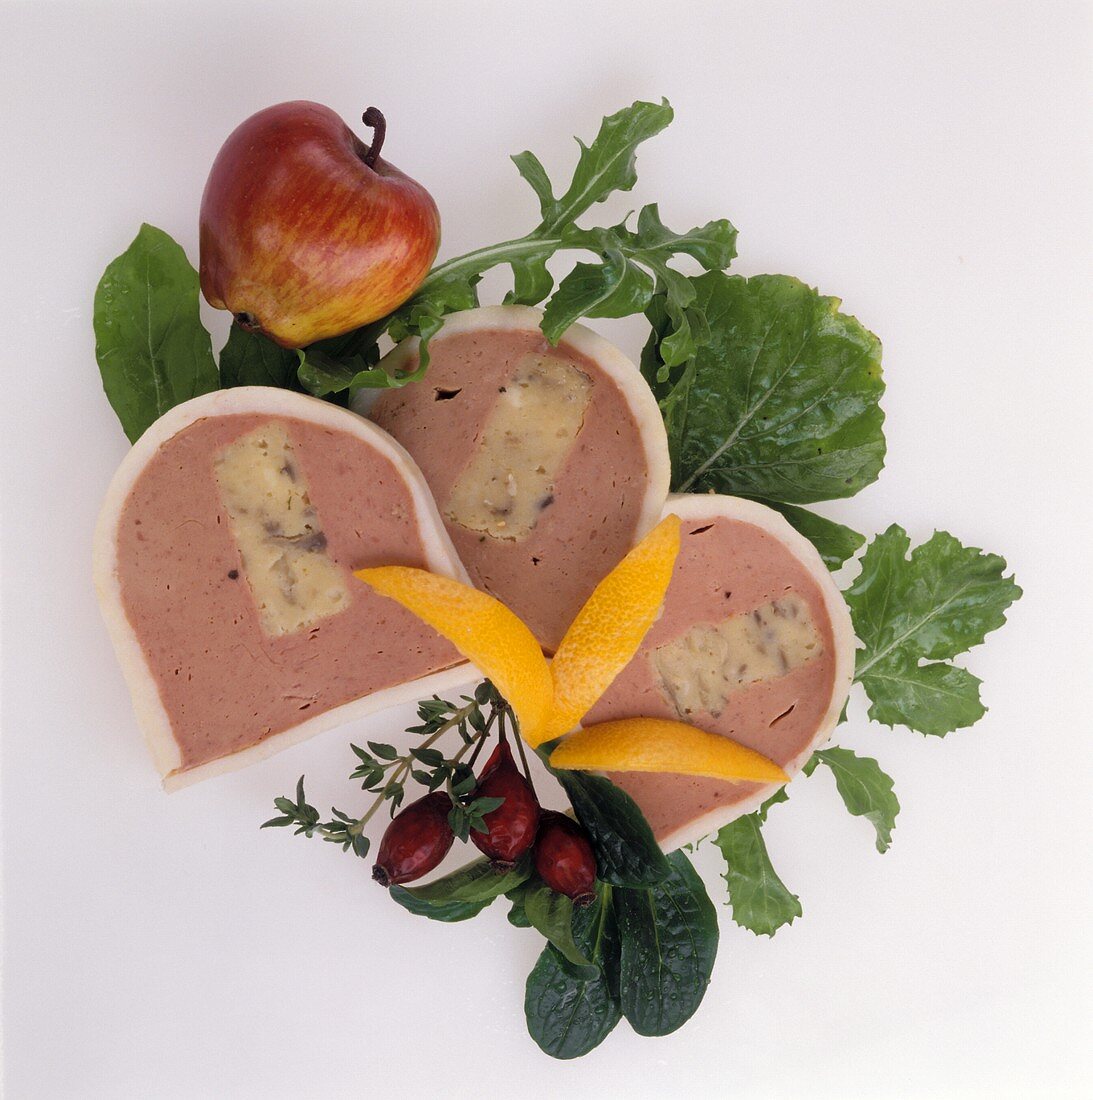 Three slices of liver pate with apple, garnished with salad